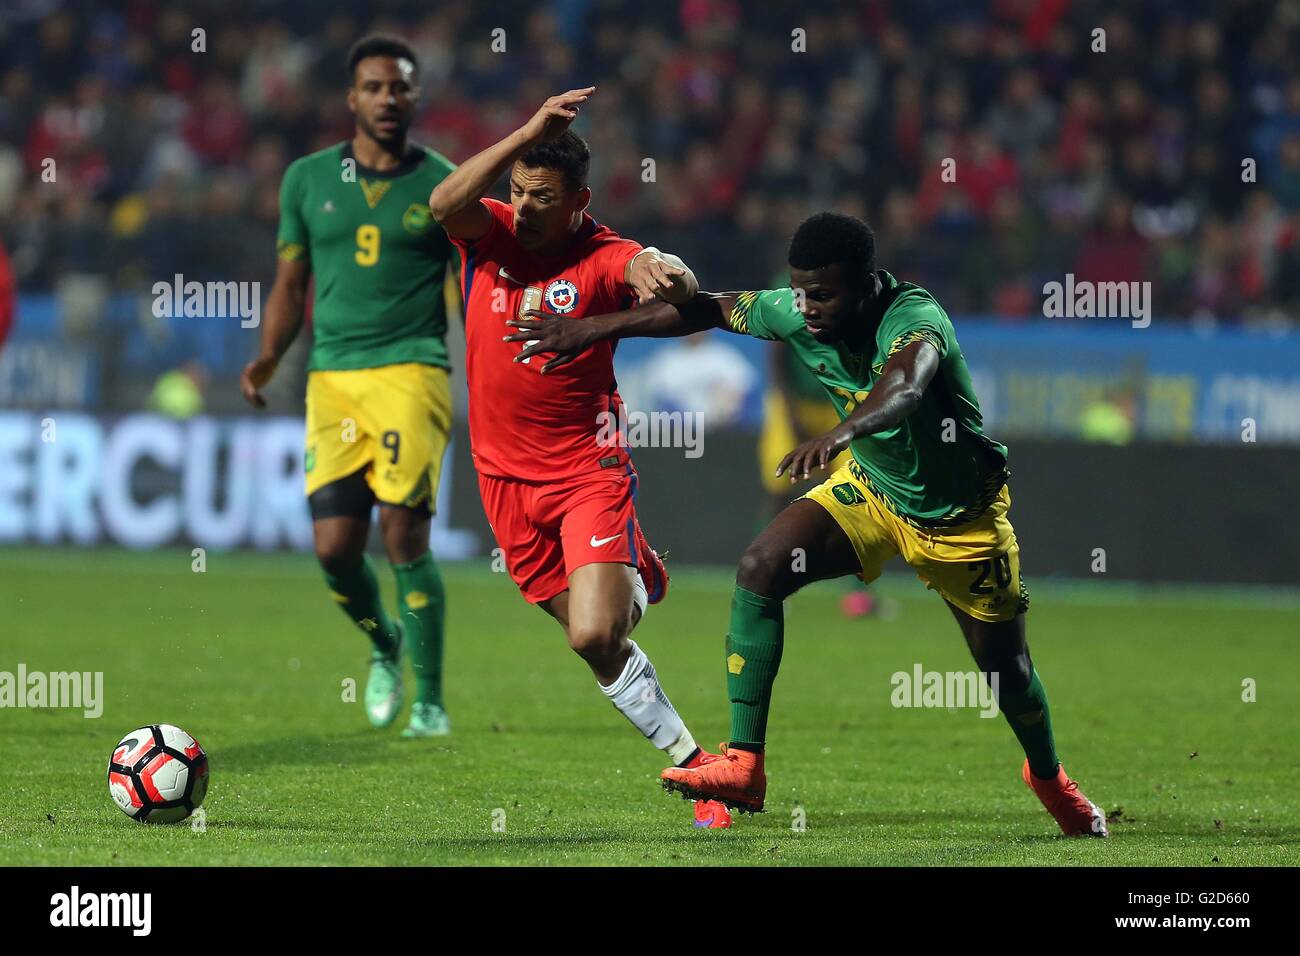 Vina Del Mar, Chile. 27th May, 2016. Image provided by the Football Federation of Chile (ANFP, for its acronym in Spanish) shows Chile's Alexis Sanchez (C) vying with Kemar Lawrence of Jamaica during the international friendly match in Vina del Mar, Chile, on May 27, 2016. © ANFP/Xinhua/Alamy Live News Stock Photo